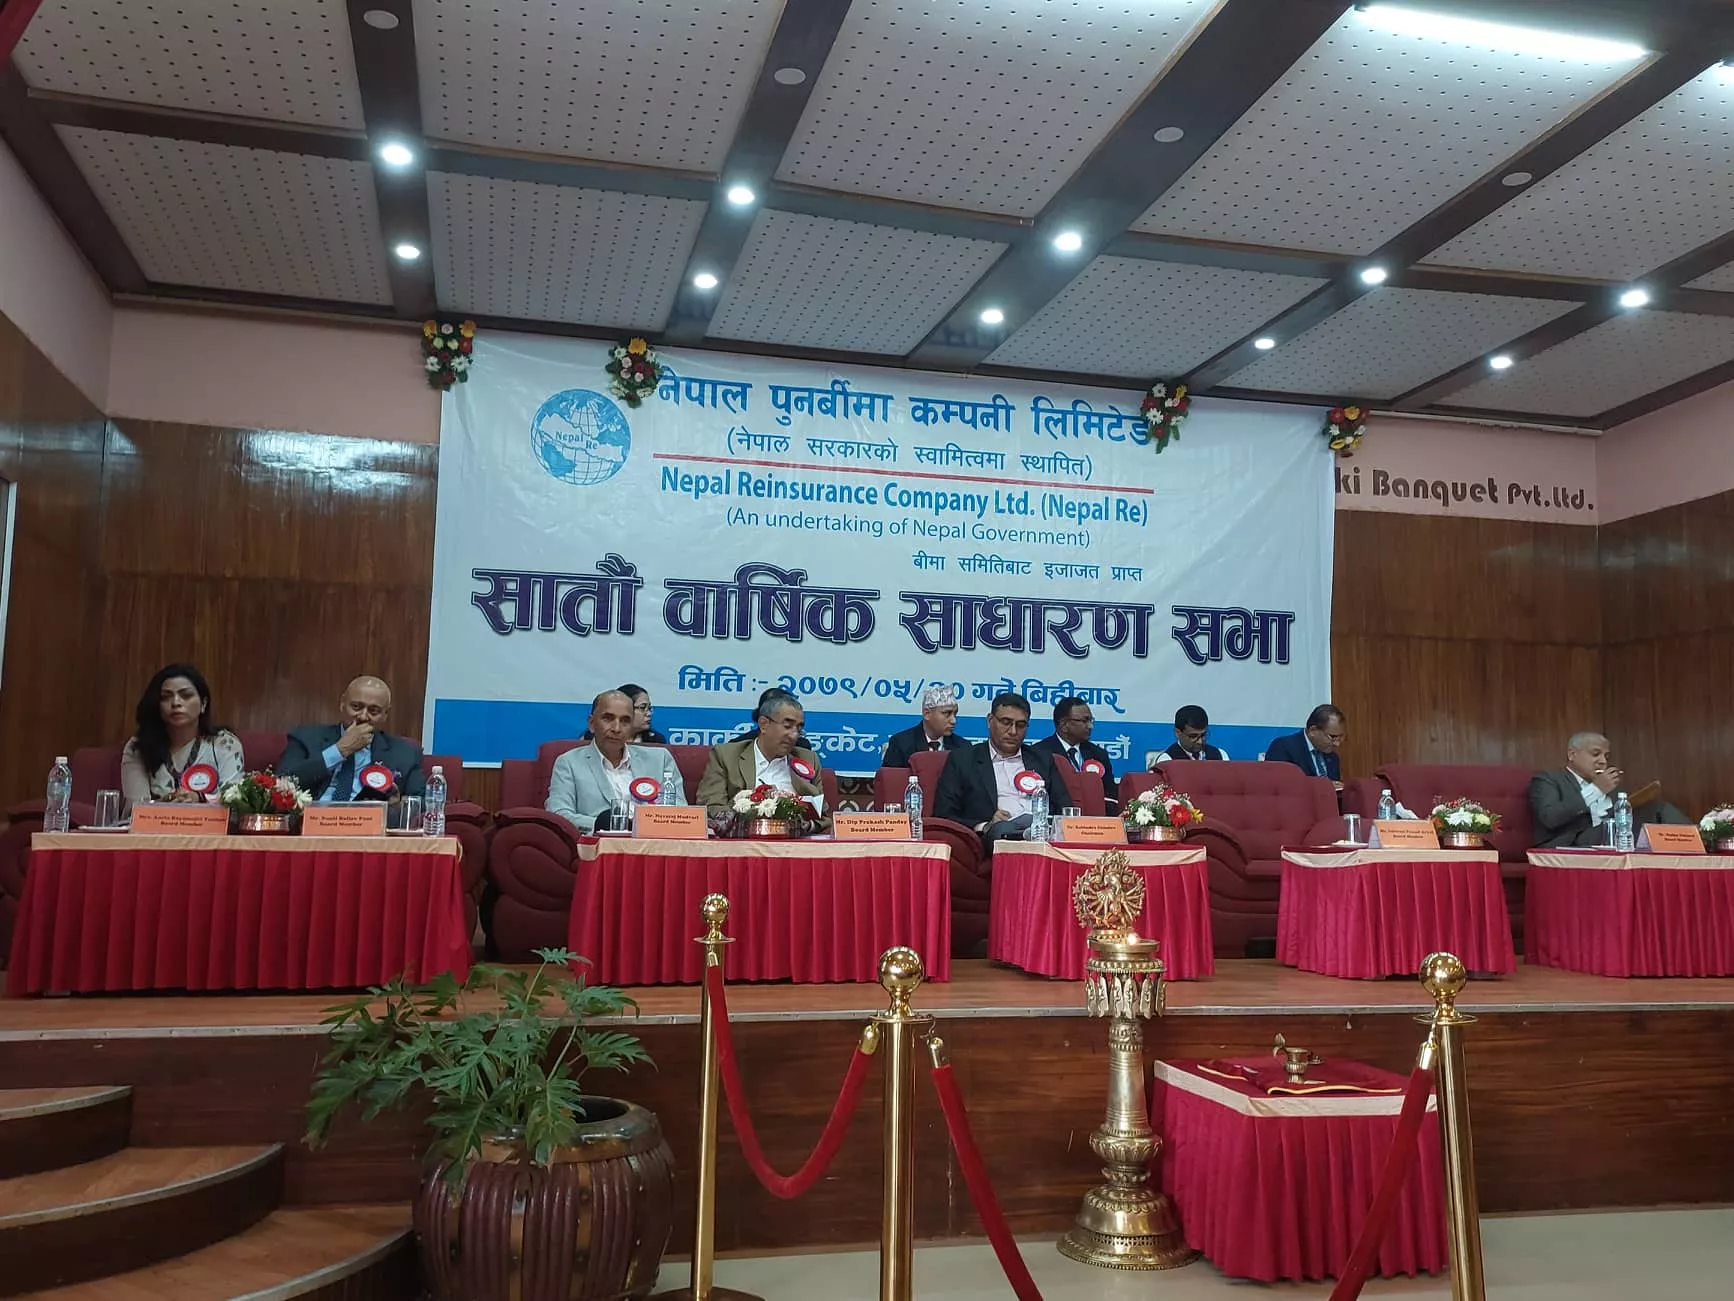 Nepal Re’s 7th AGM Endorses Proposal for 5 Percent Stock Dividend